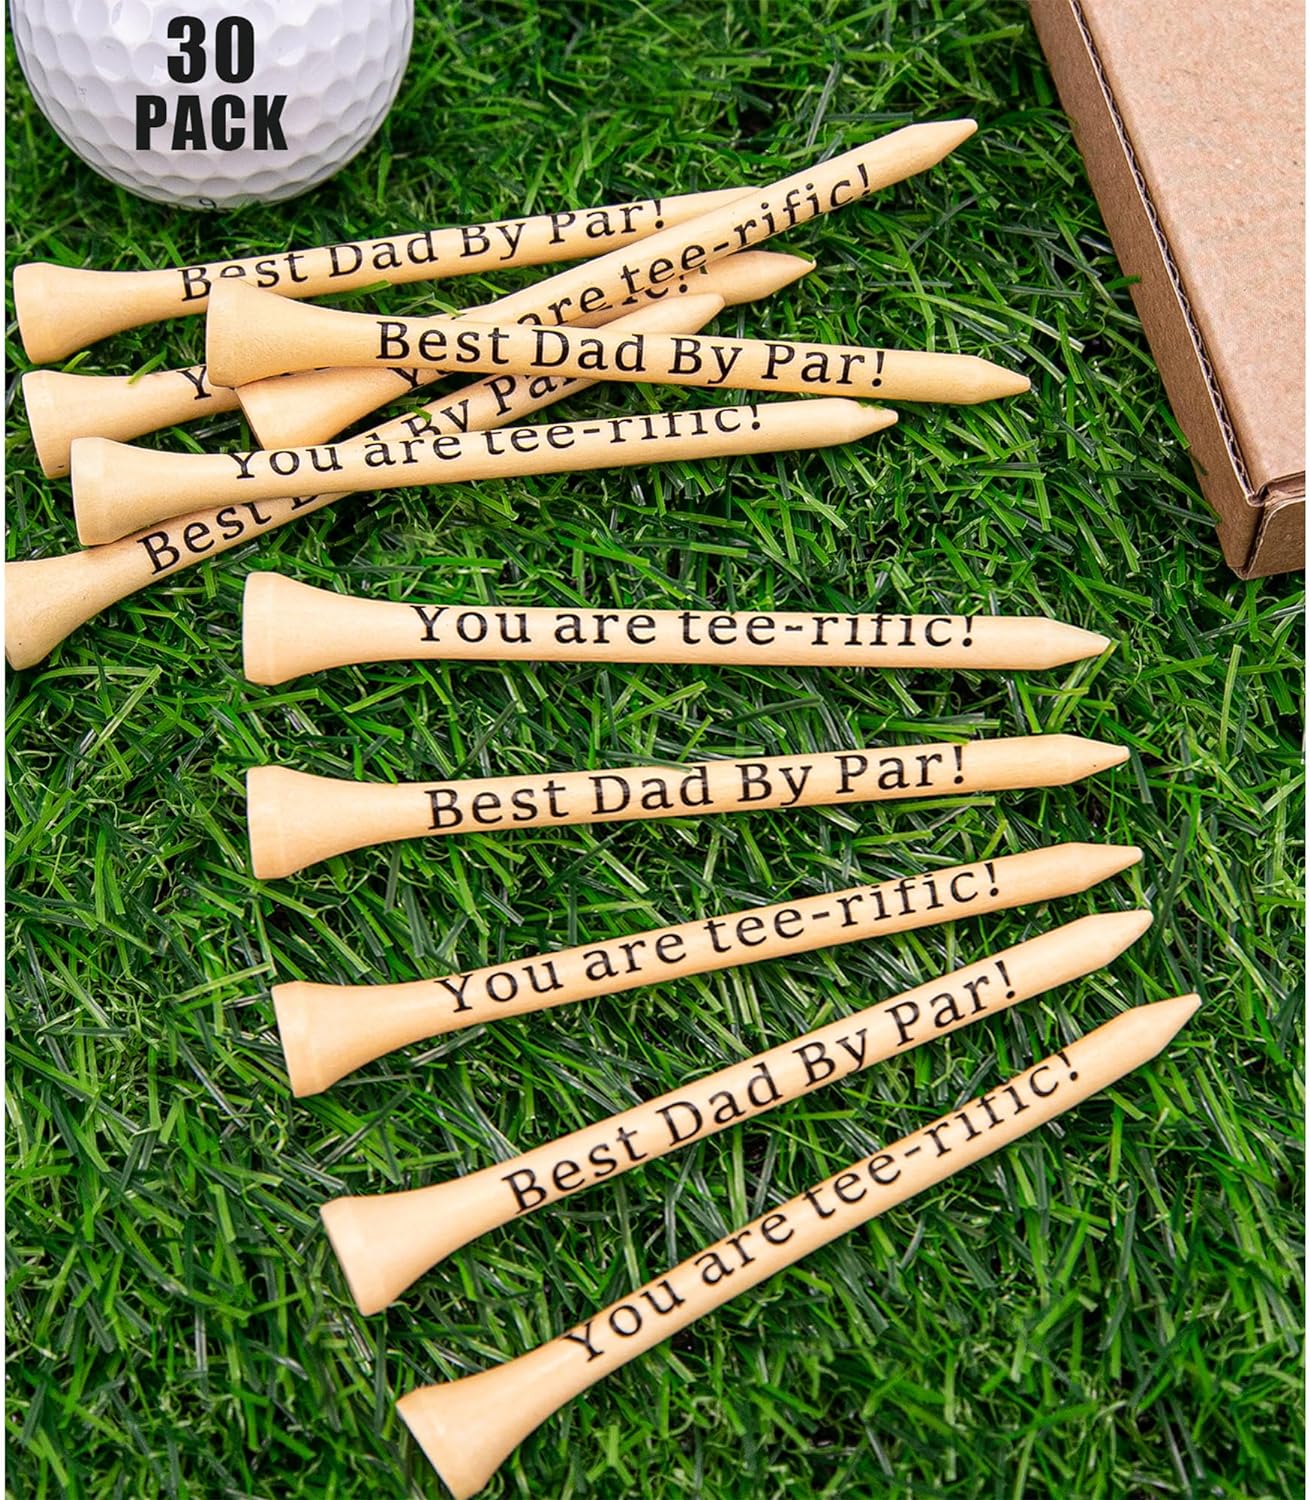 30 Pk. Wooden 3-1/4 inch Best Dad by Par Golf Tees $4.19 + Free Ship w/Prime or on orders $35+